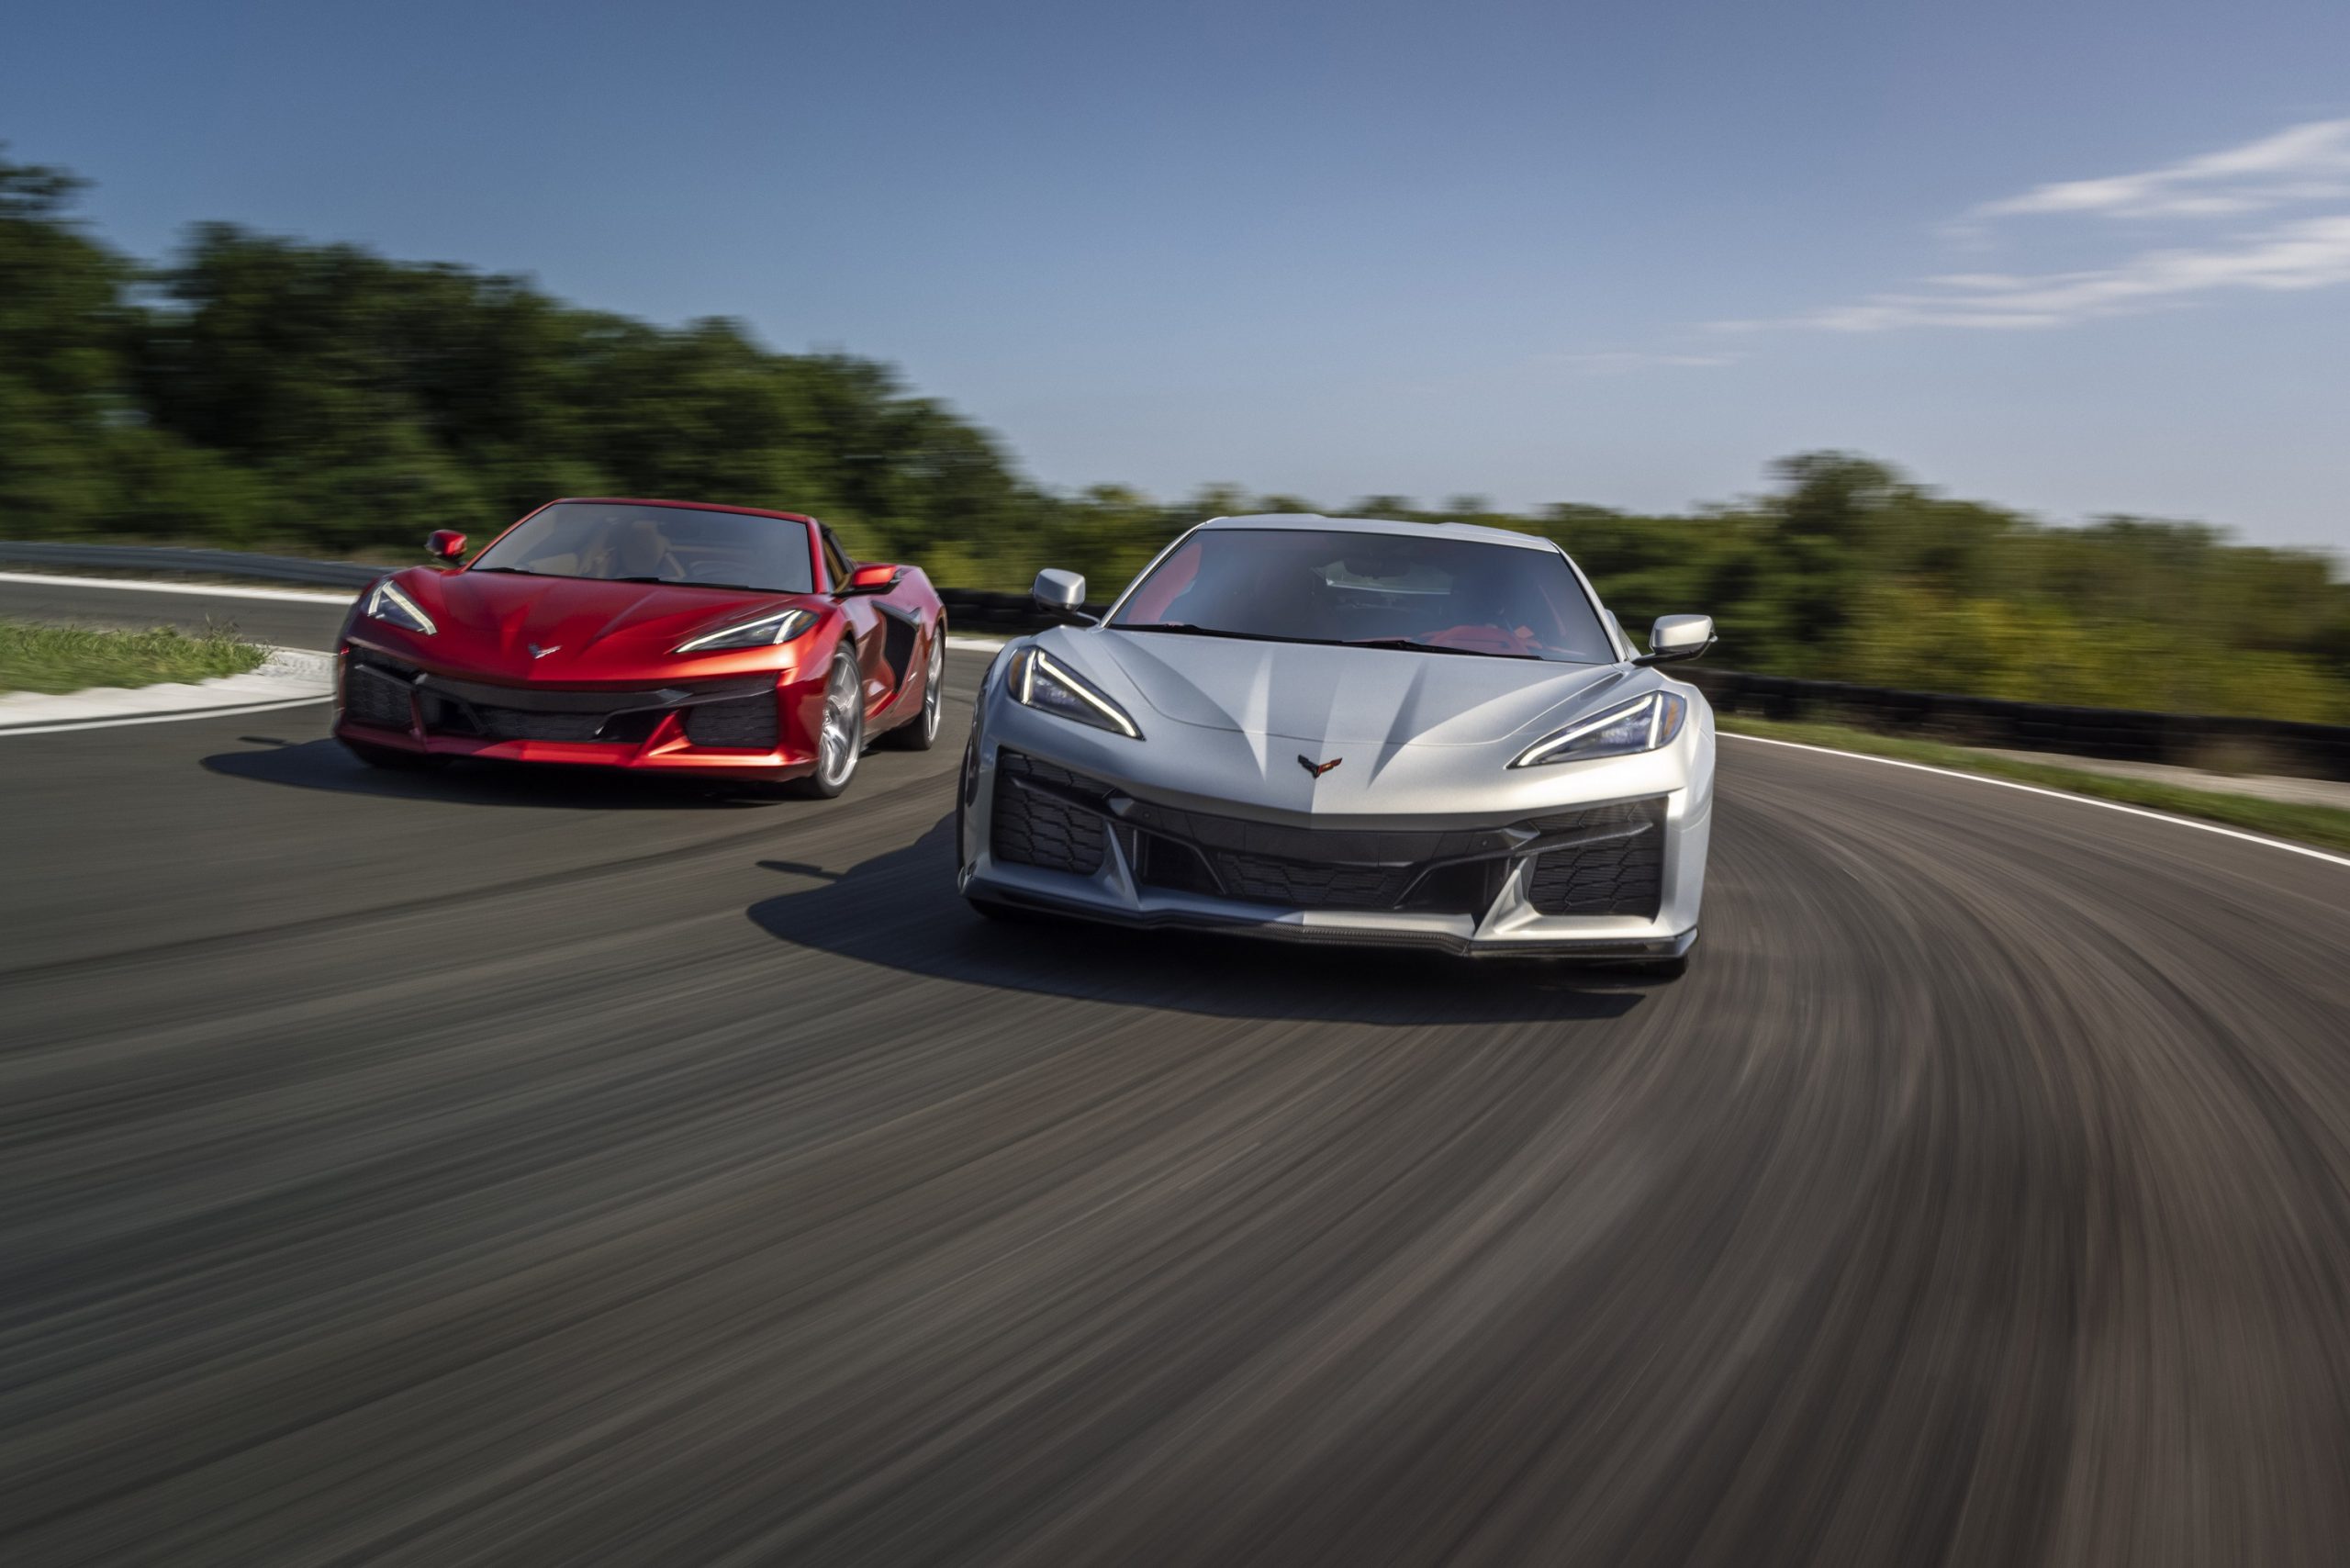 A pair of Chevrolet Corvette Z06 models in red and silver on a race track